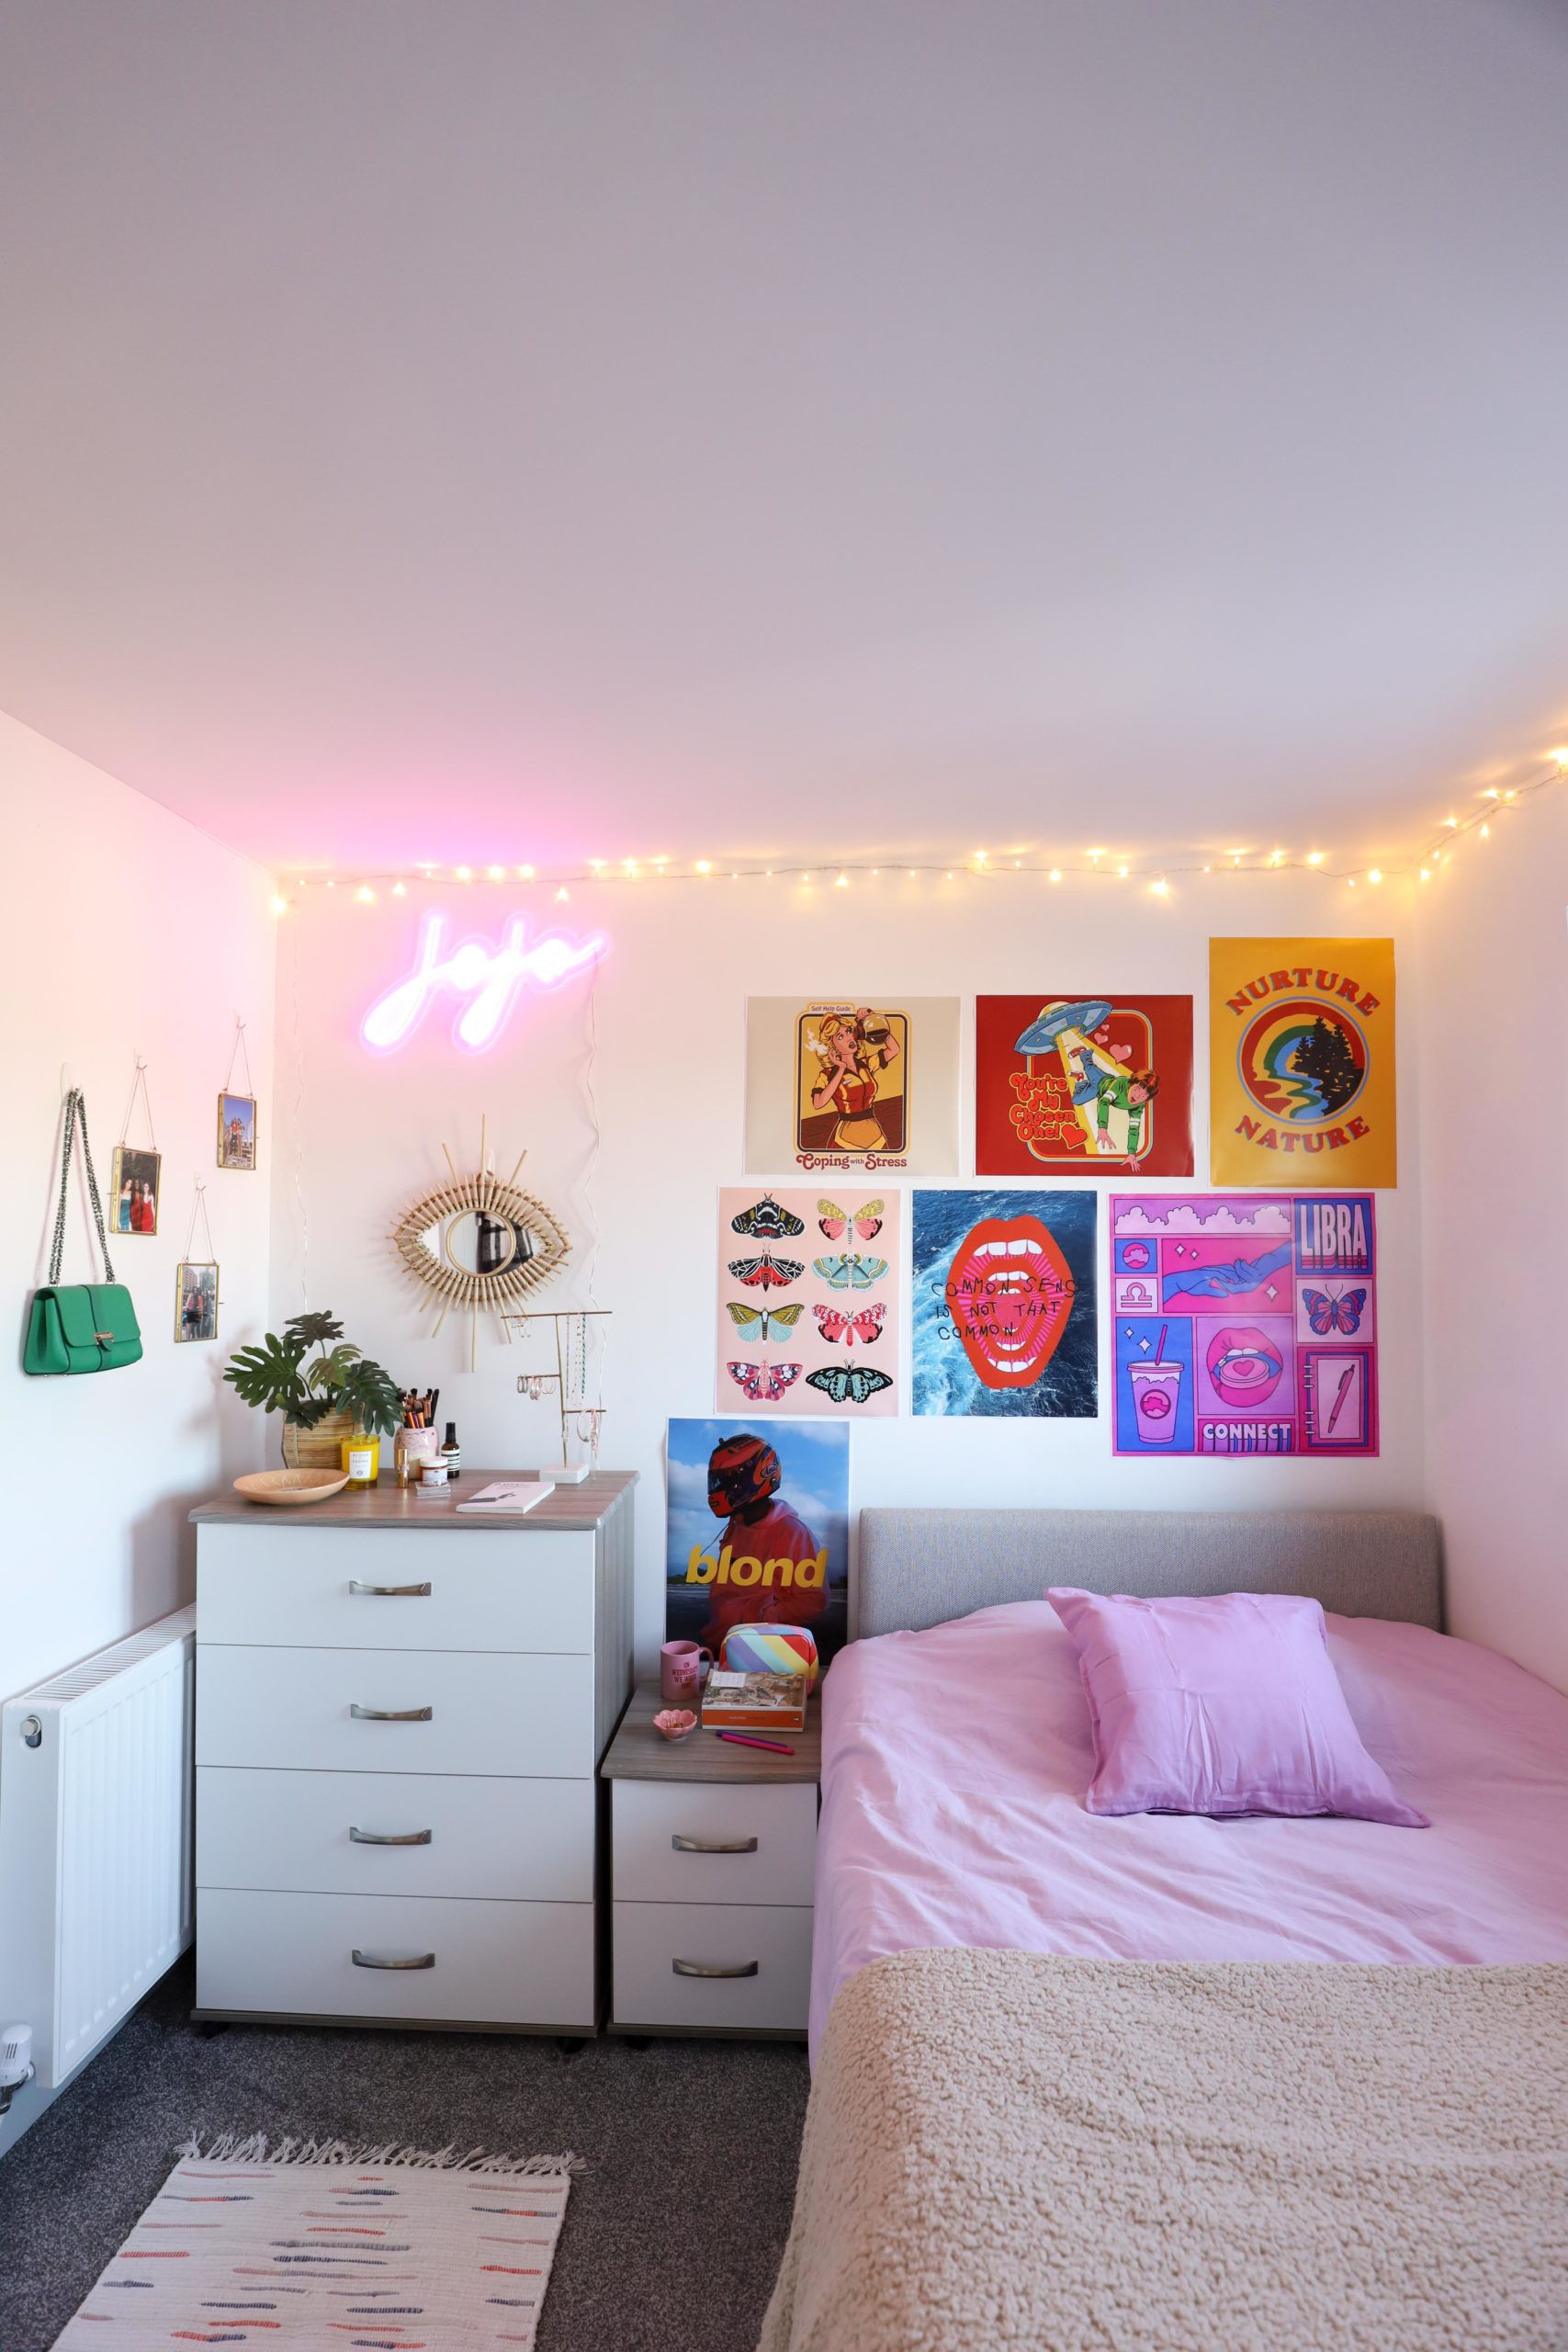 Get inspired by these uni room decoration ideas for your college dorm